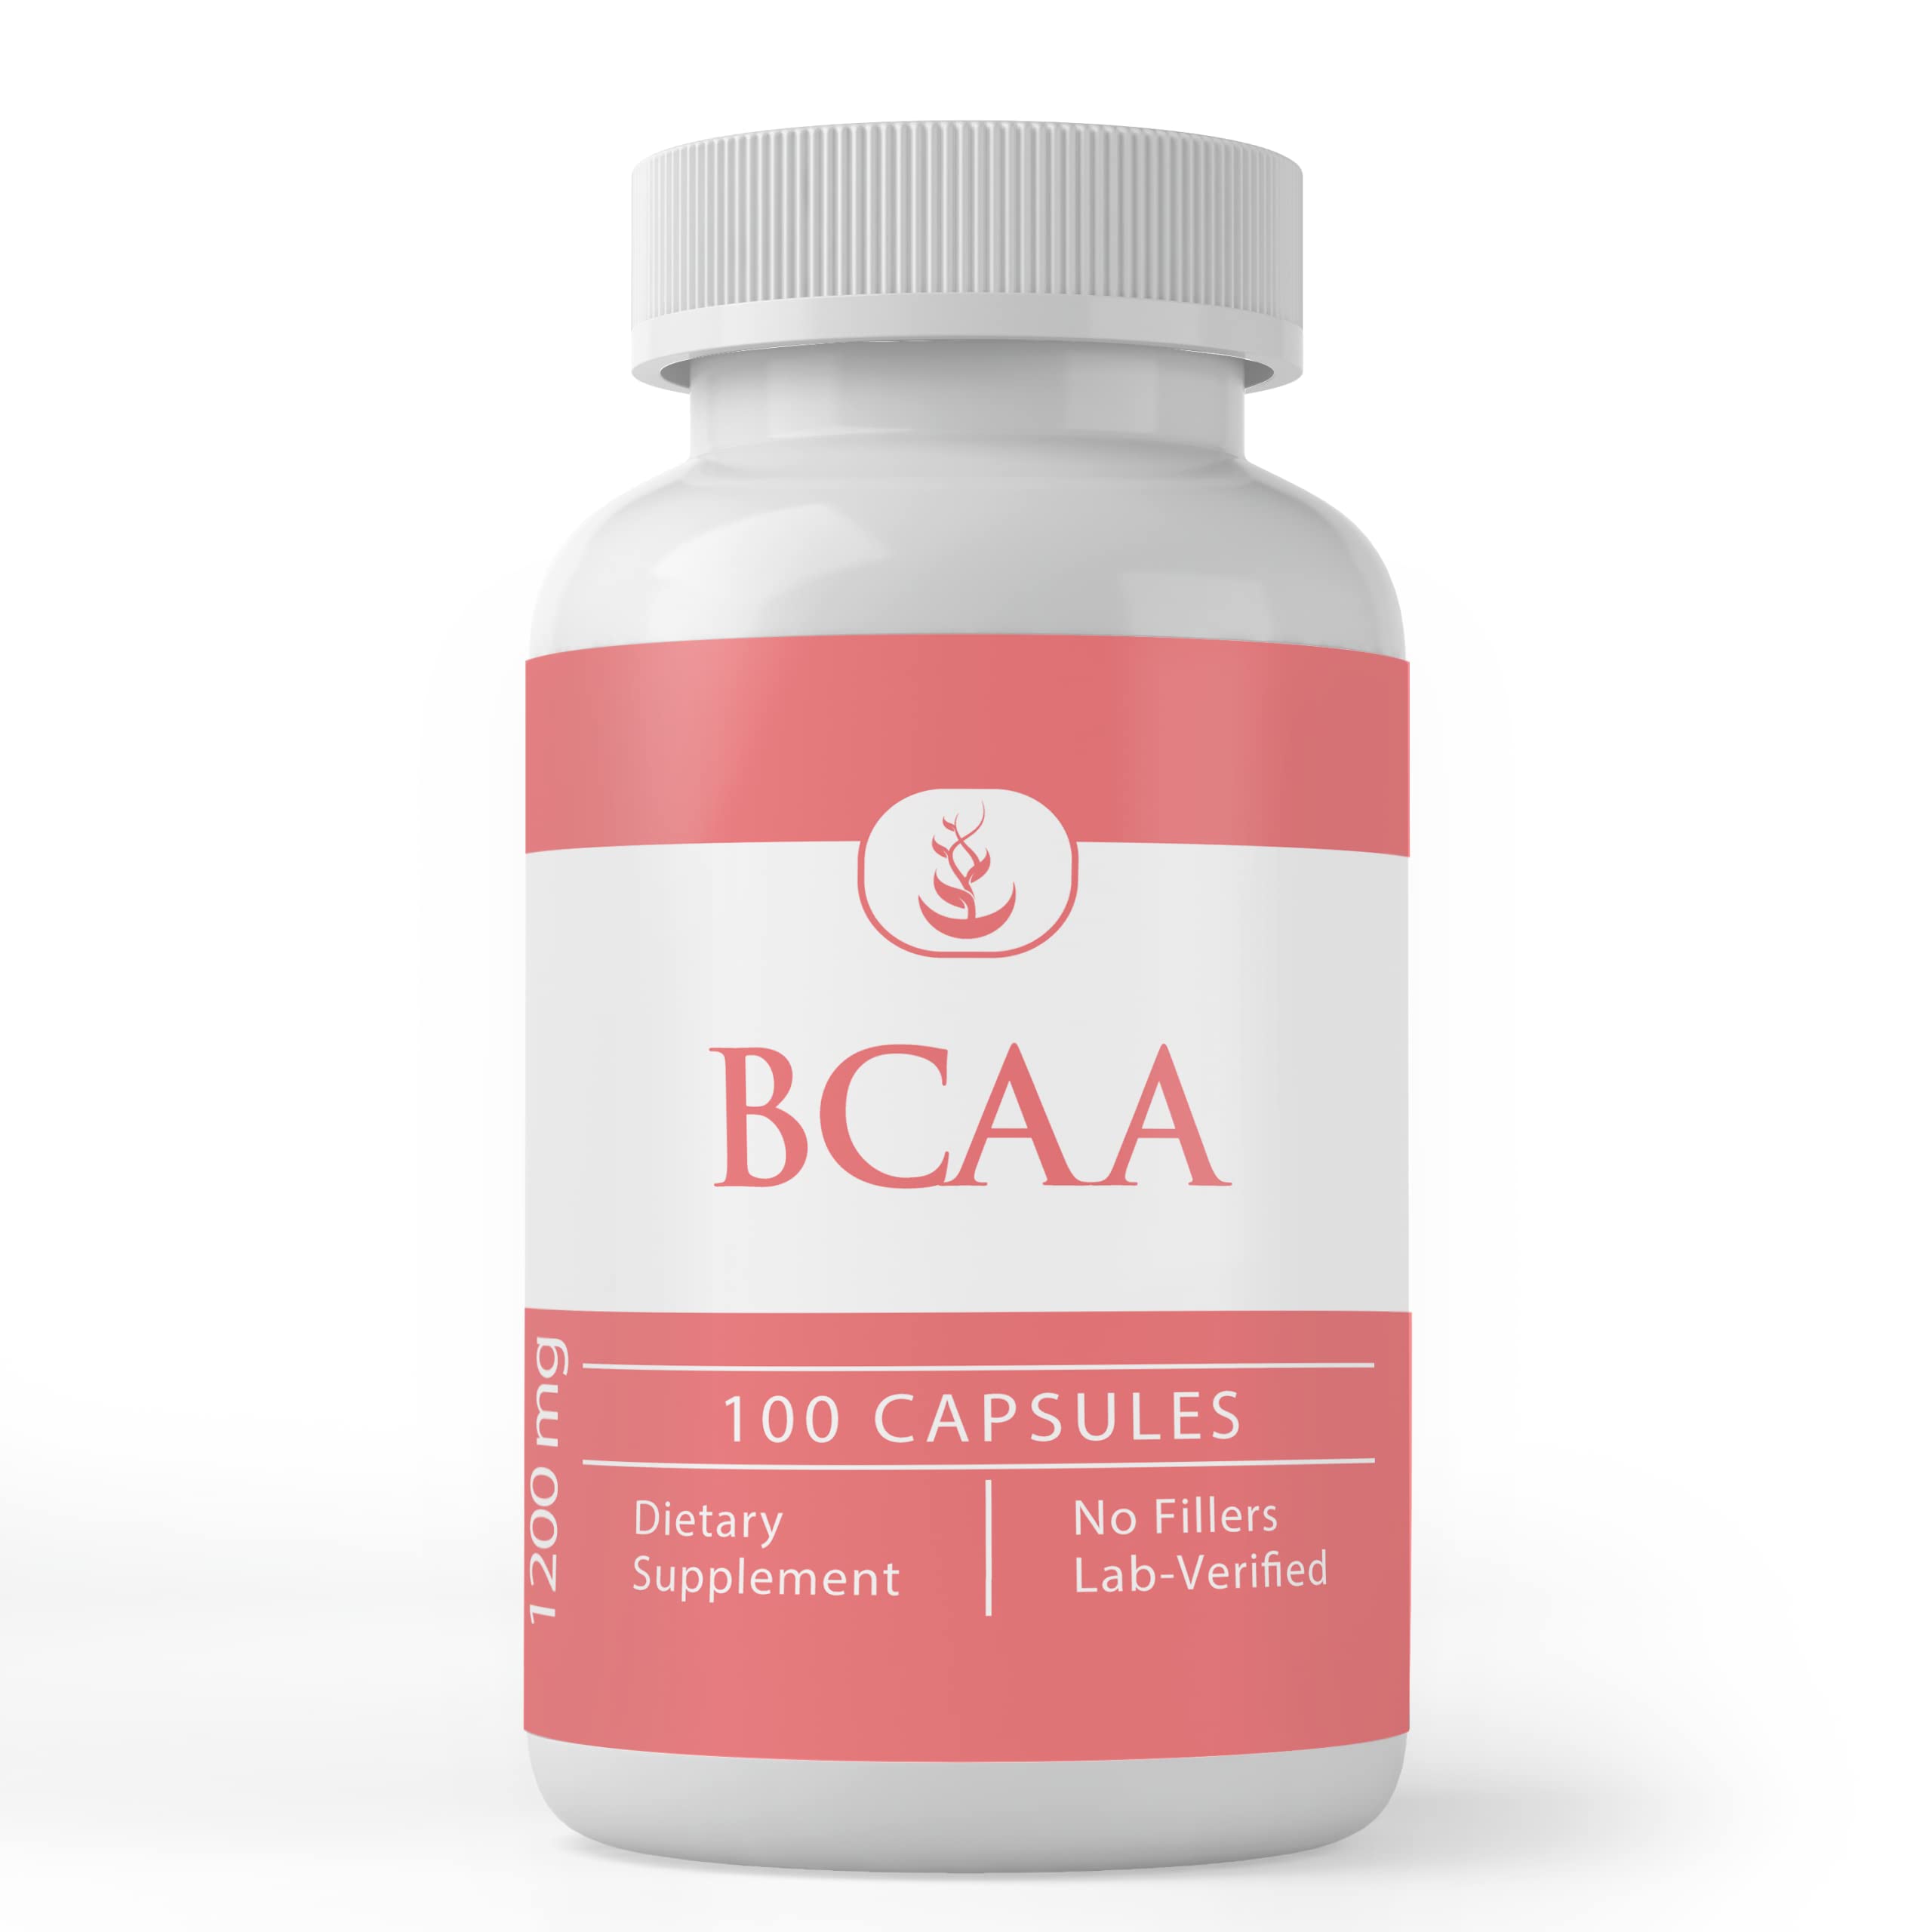 PURE ORIGINAL INGREDIENTS HMB and BCAA Bundle, 100 Capsules Each, Always Pure, No Additives or Fillers